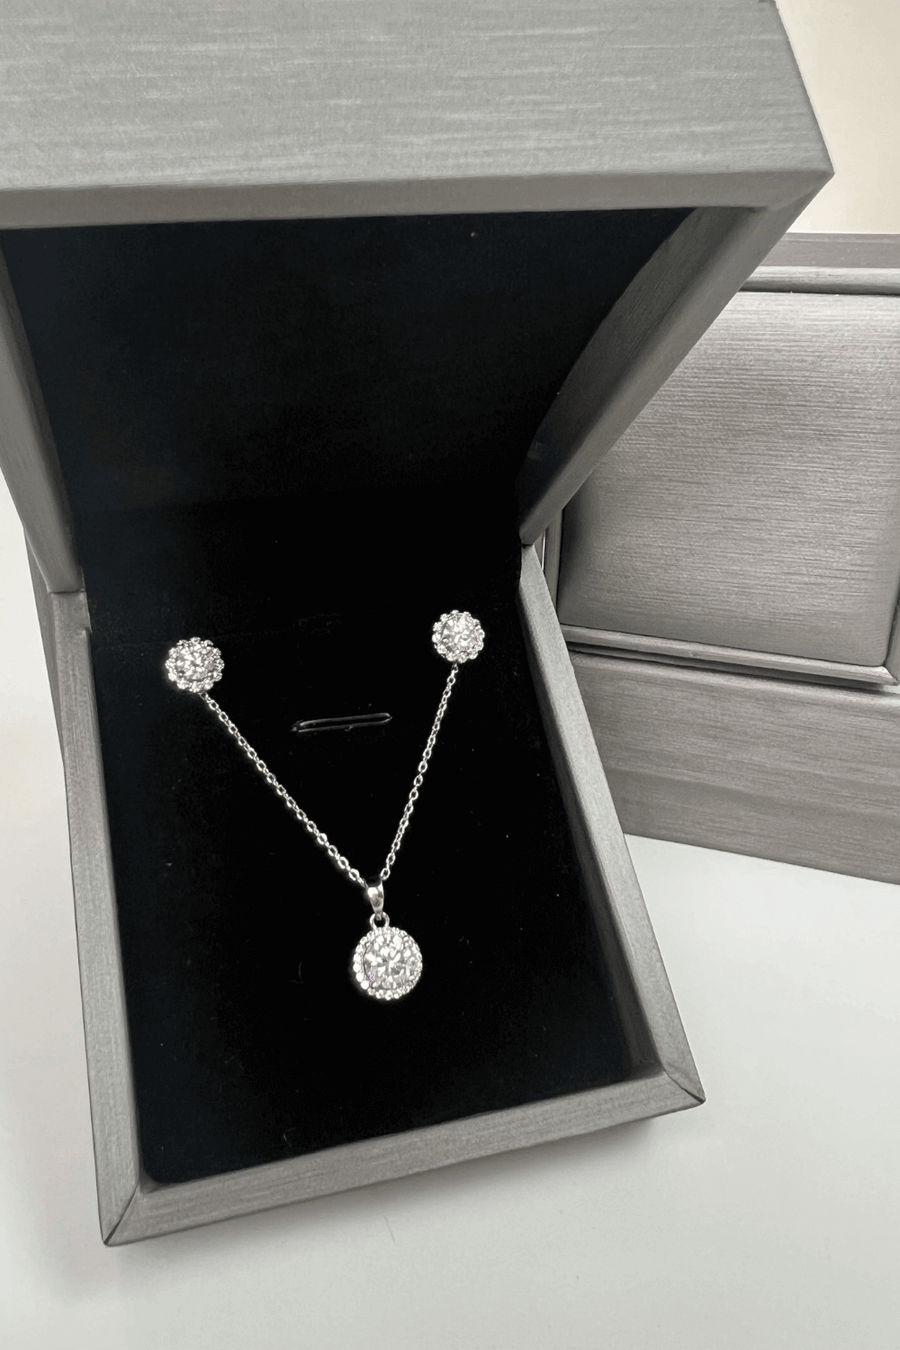 Best Diamond Jewelry Bundle Set Gift | Best Floral Diamond Necklace, Earrings Jewelry Gift for Women, Mother, Wife, Daughter | MASON New York